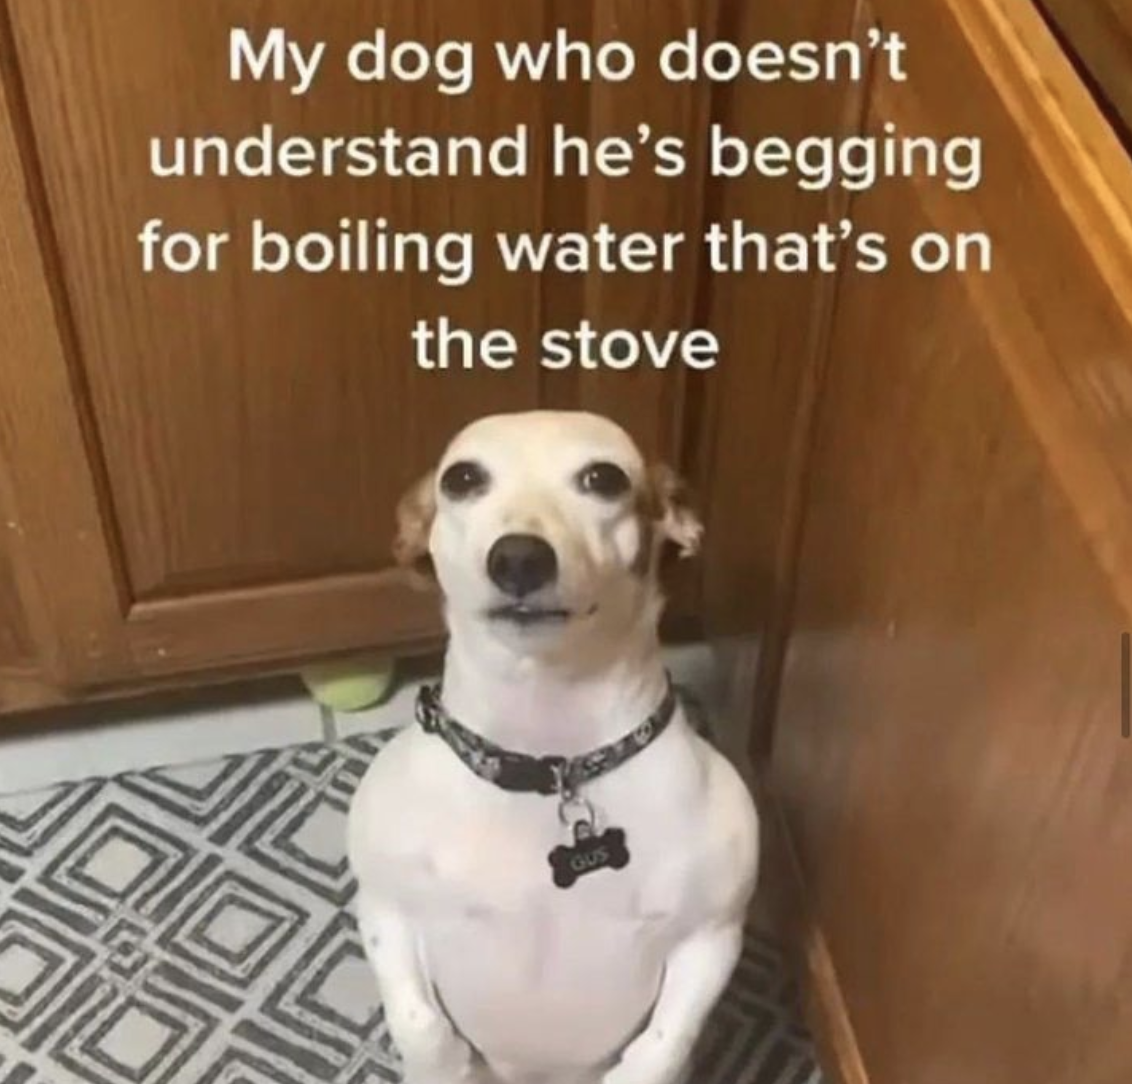 &quot;My dog who doesn&#x27;t understand he&#x27;s begging for boiling water that&#x27;s on the stove.&quot;